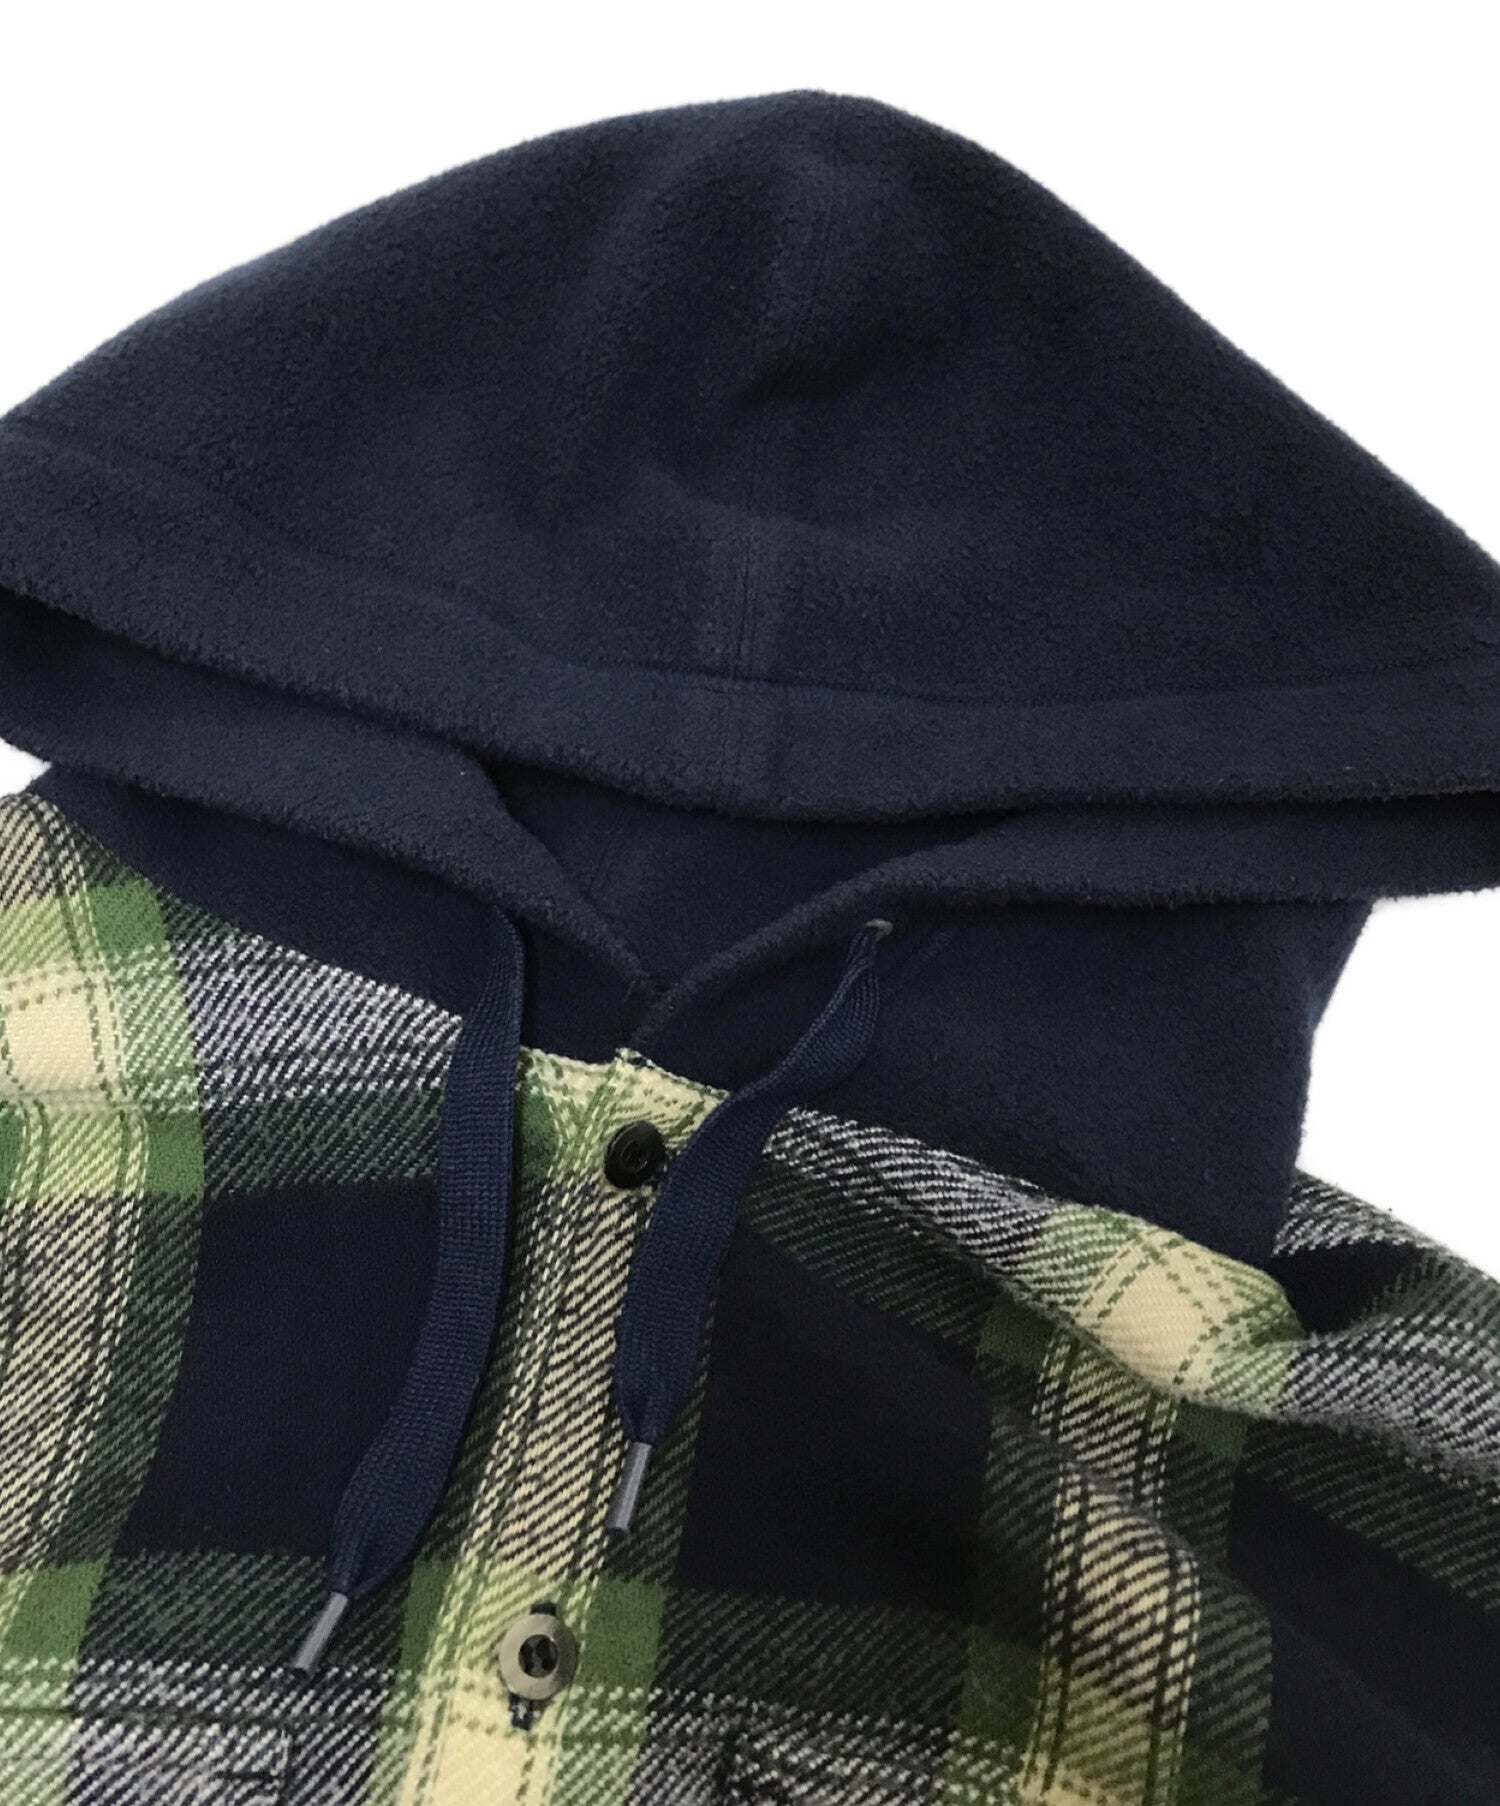 DESCENDANT Hooded Flannel Check Shirt Flannel Shirt Hoodie Layered